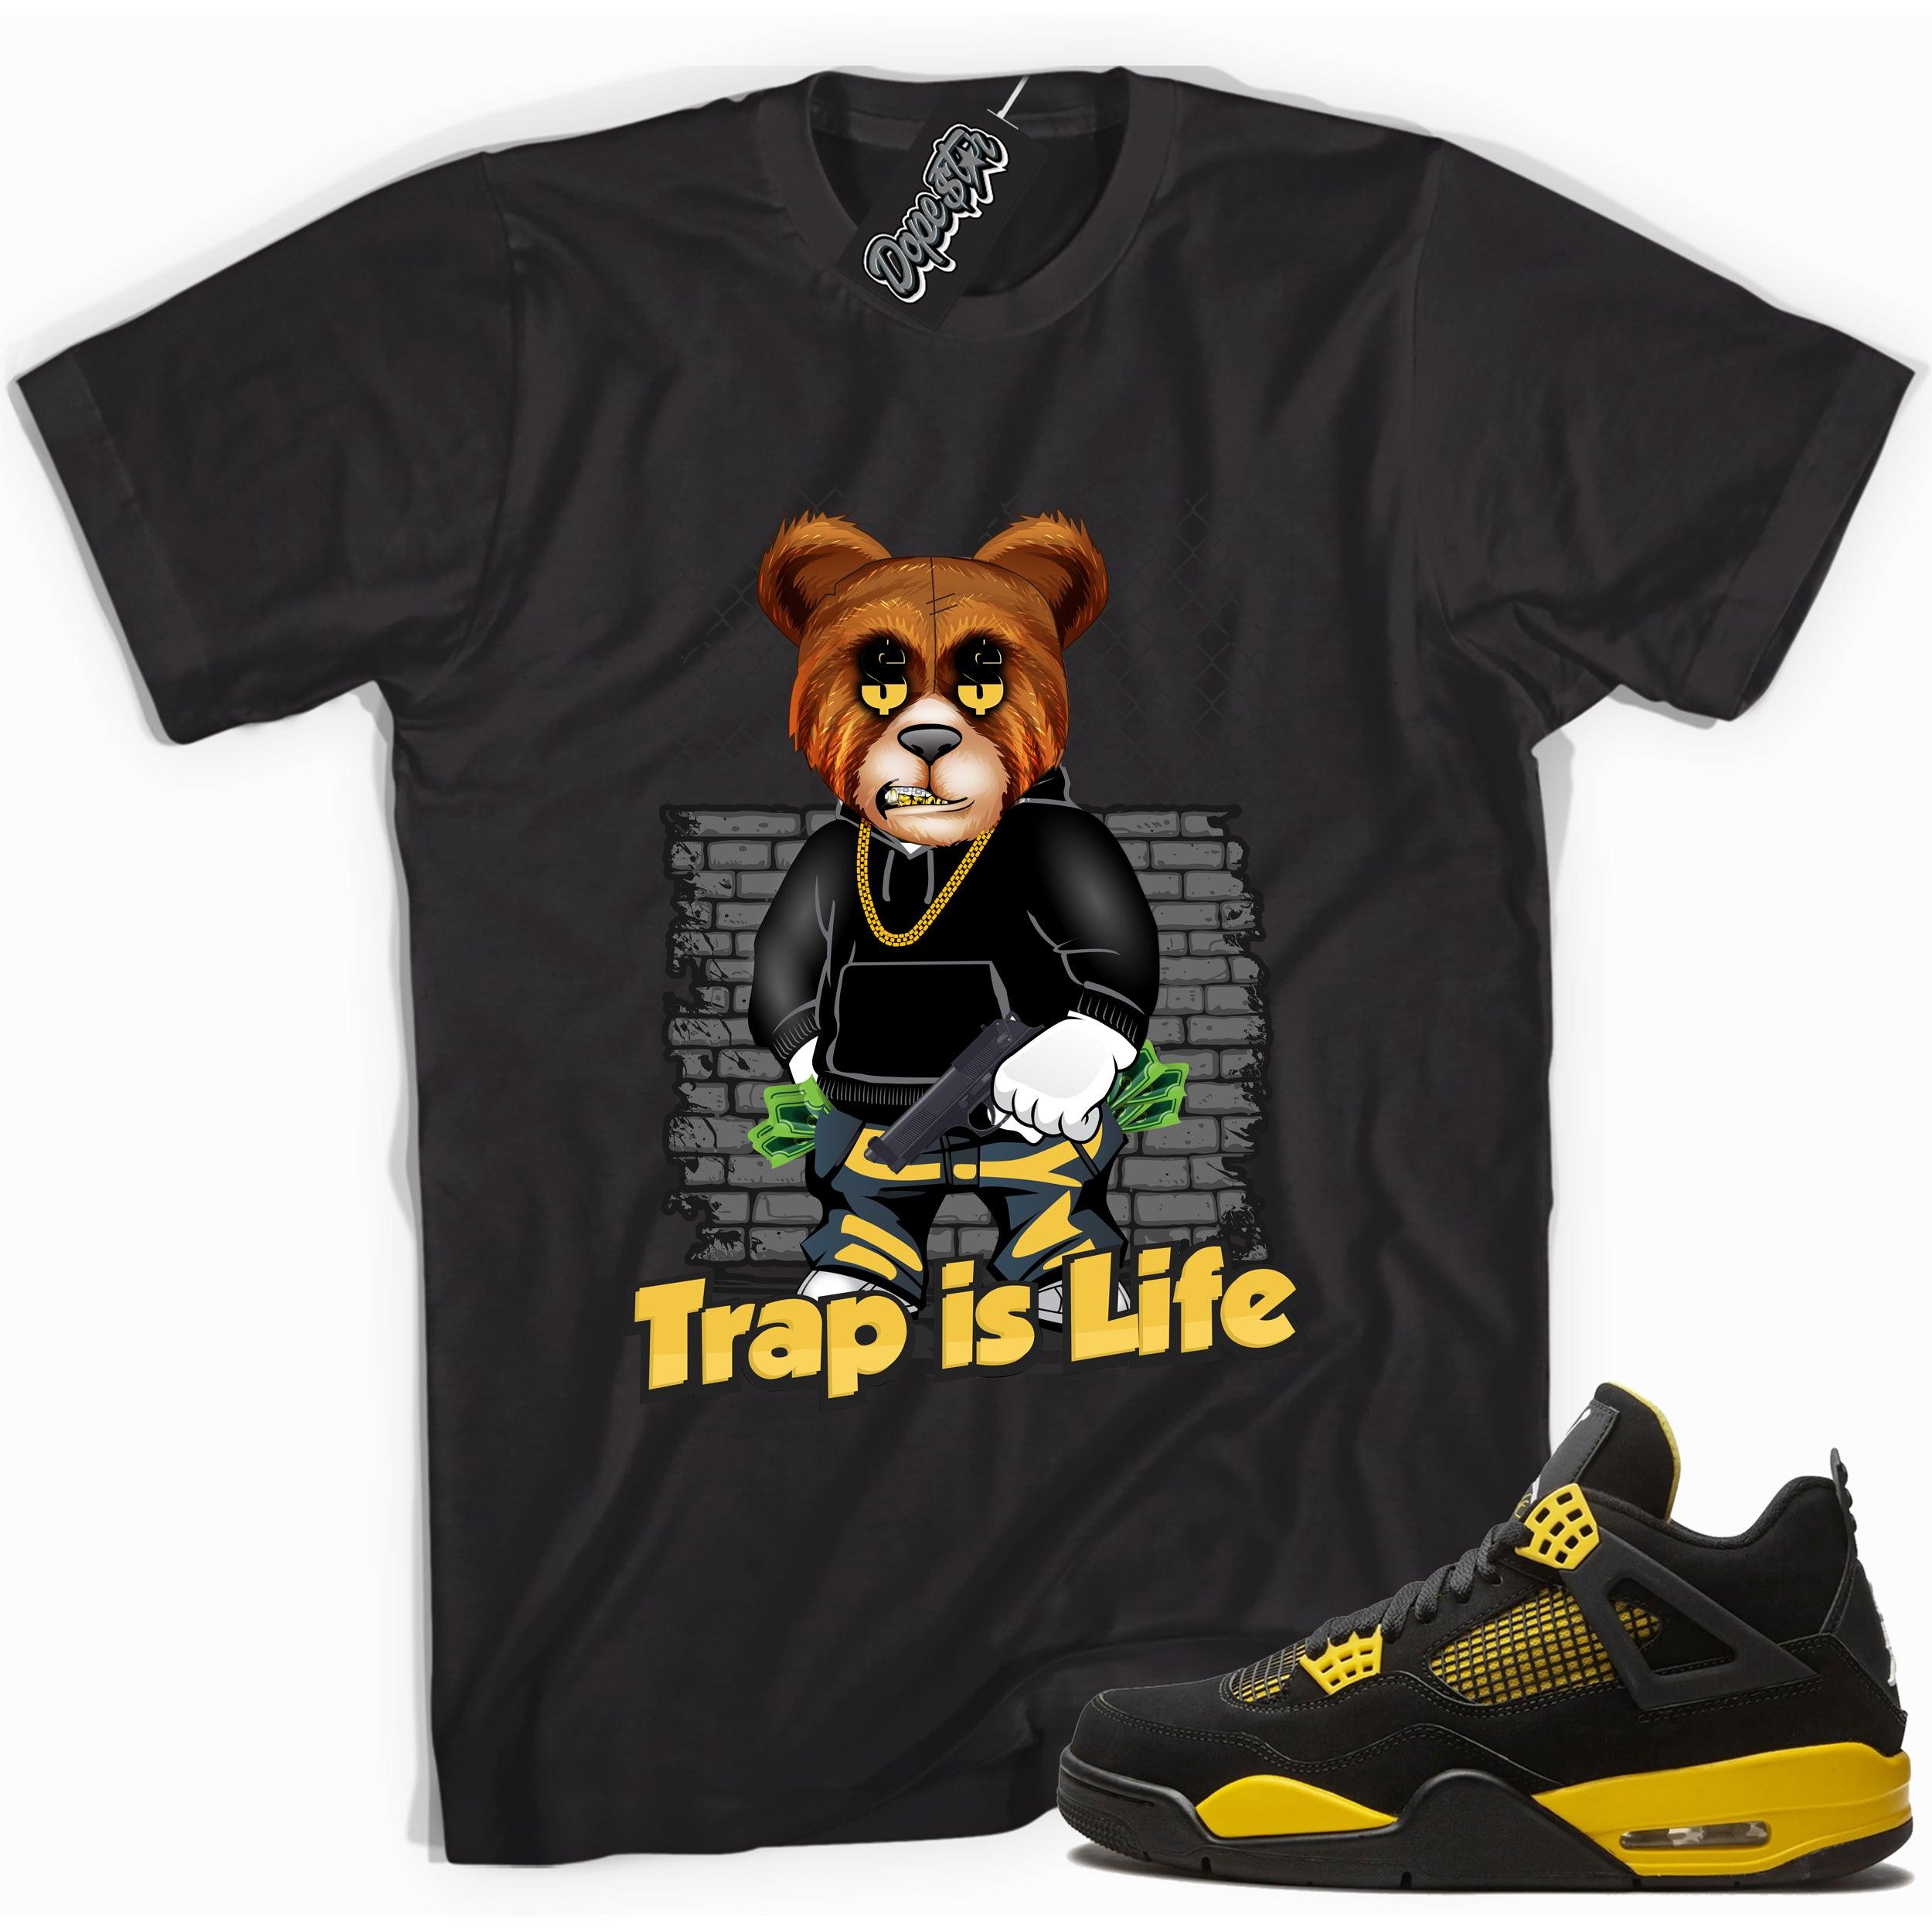 Cool black graphic tee with 'trap is life' print, that perfectly matches  Air Jordan 4 Thunder sneakers